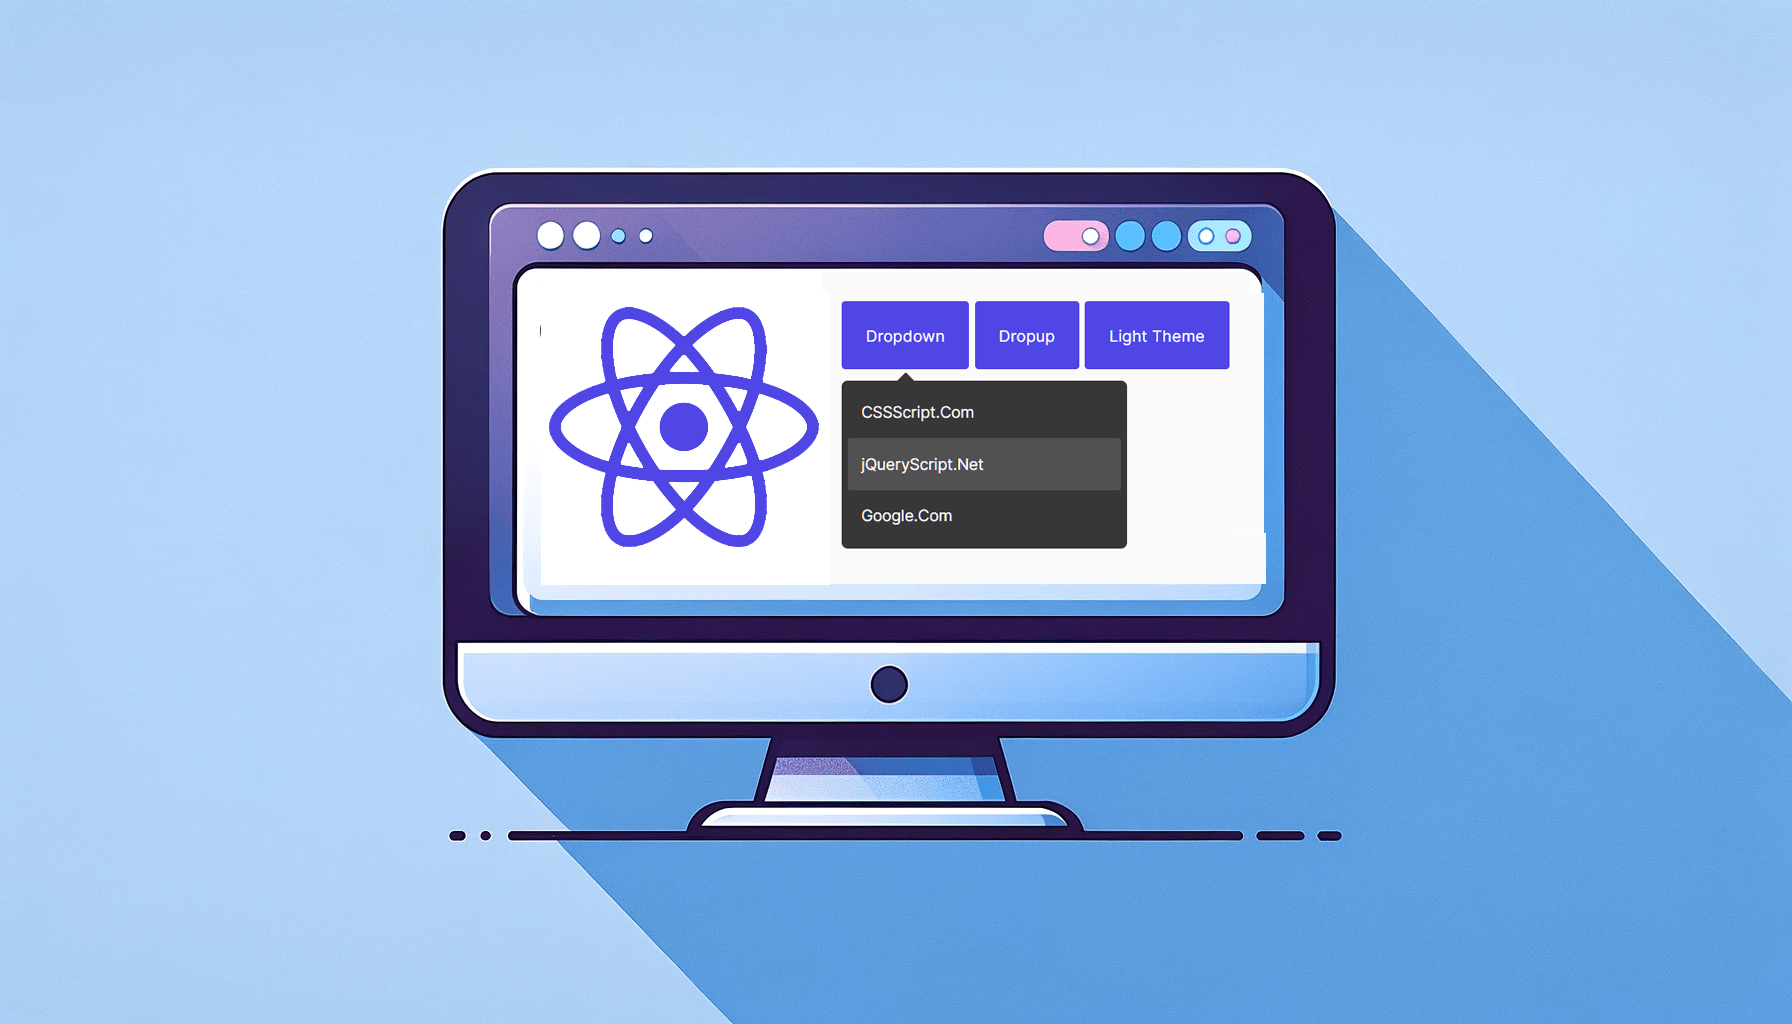 Building an Infinite Select Dropdown Component with React